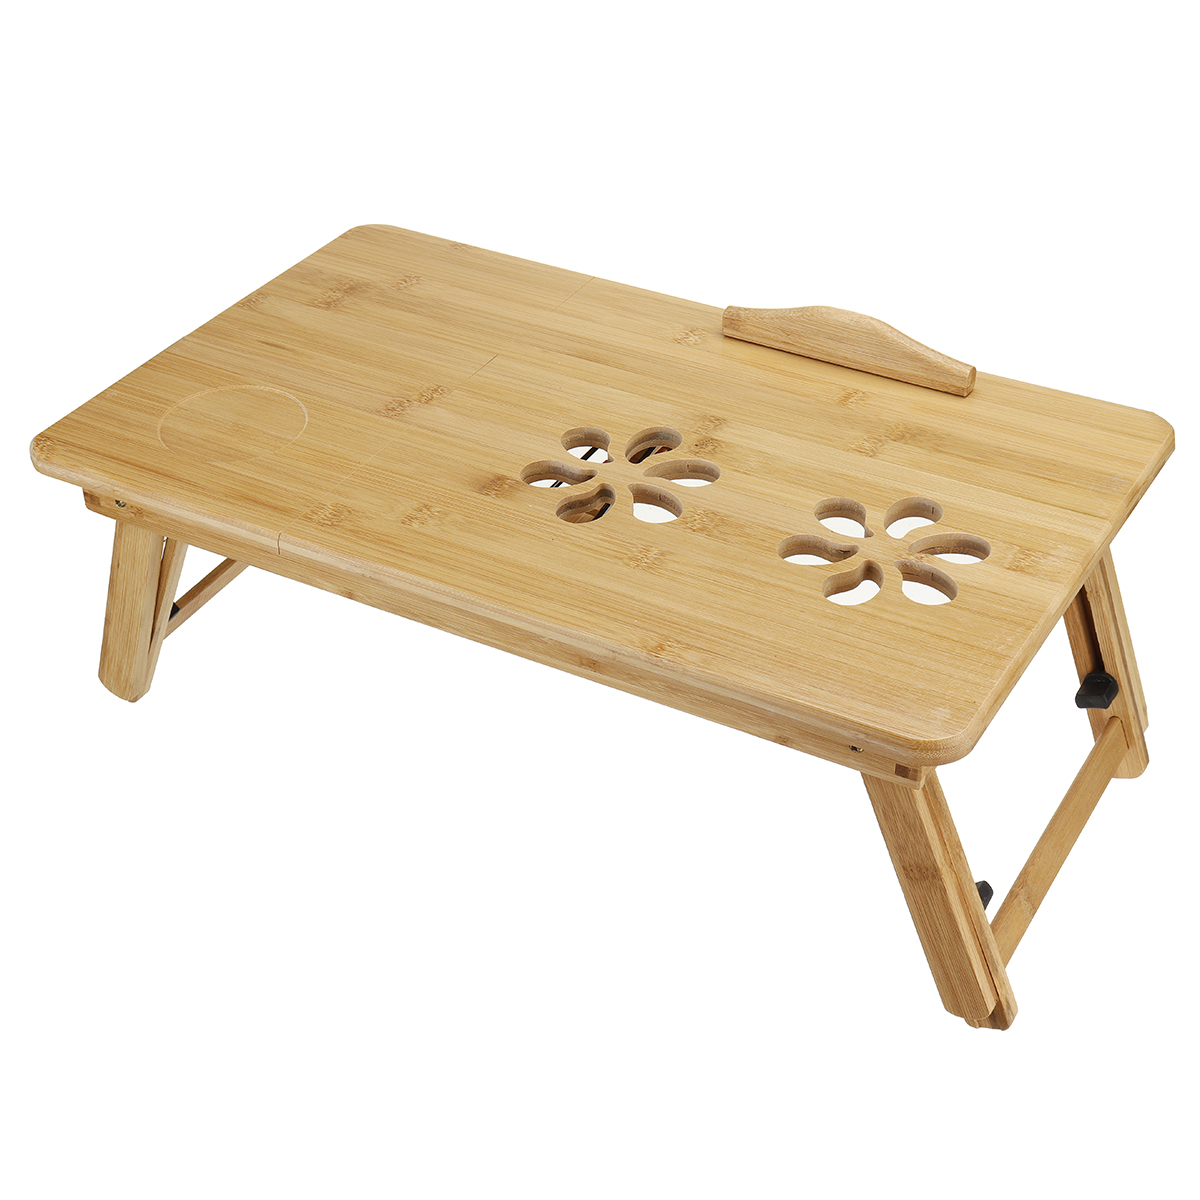 Find Portable Deluxe Bamboo Laptop Bed Desk Table Foldable Workstation Tray Lap for Sale on Gipsybee.com with cryptocurrencies